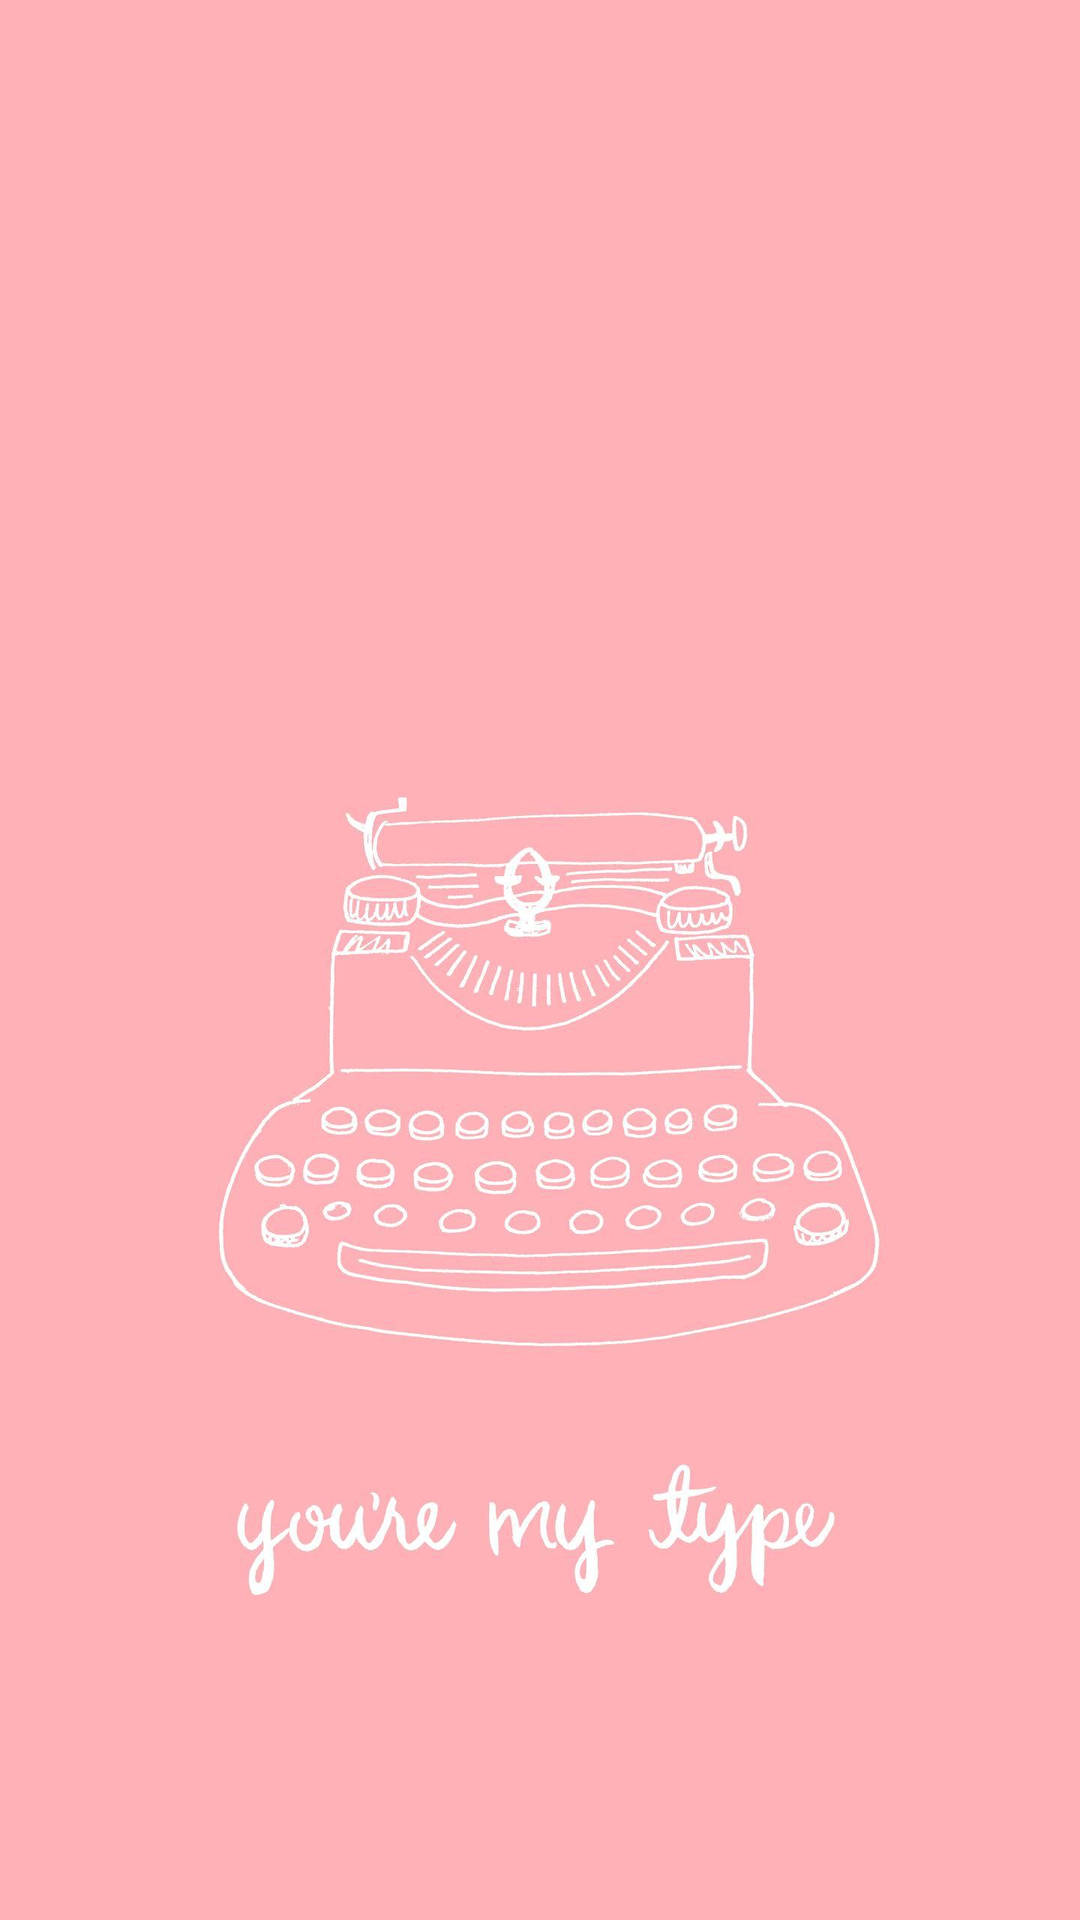 Aesthetic Pink Iphone Typewriter You're My Type Background